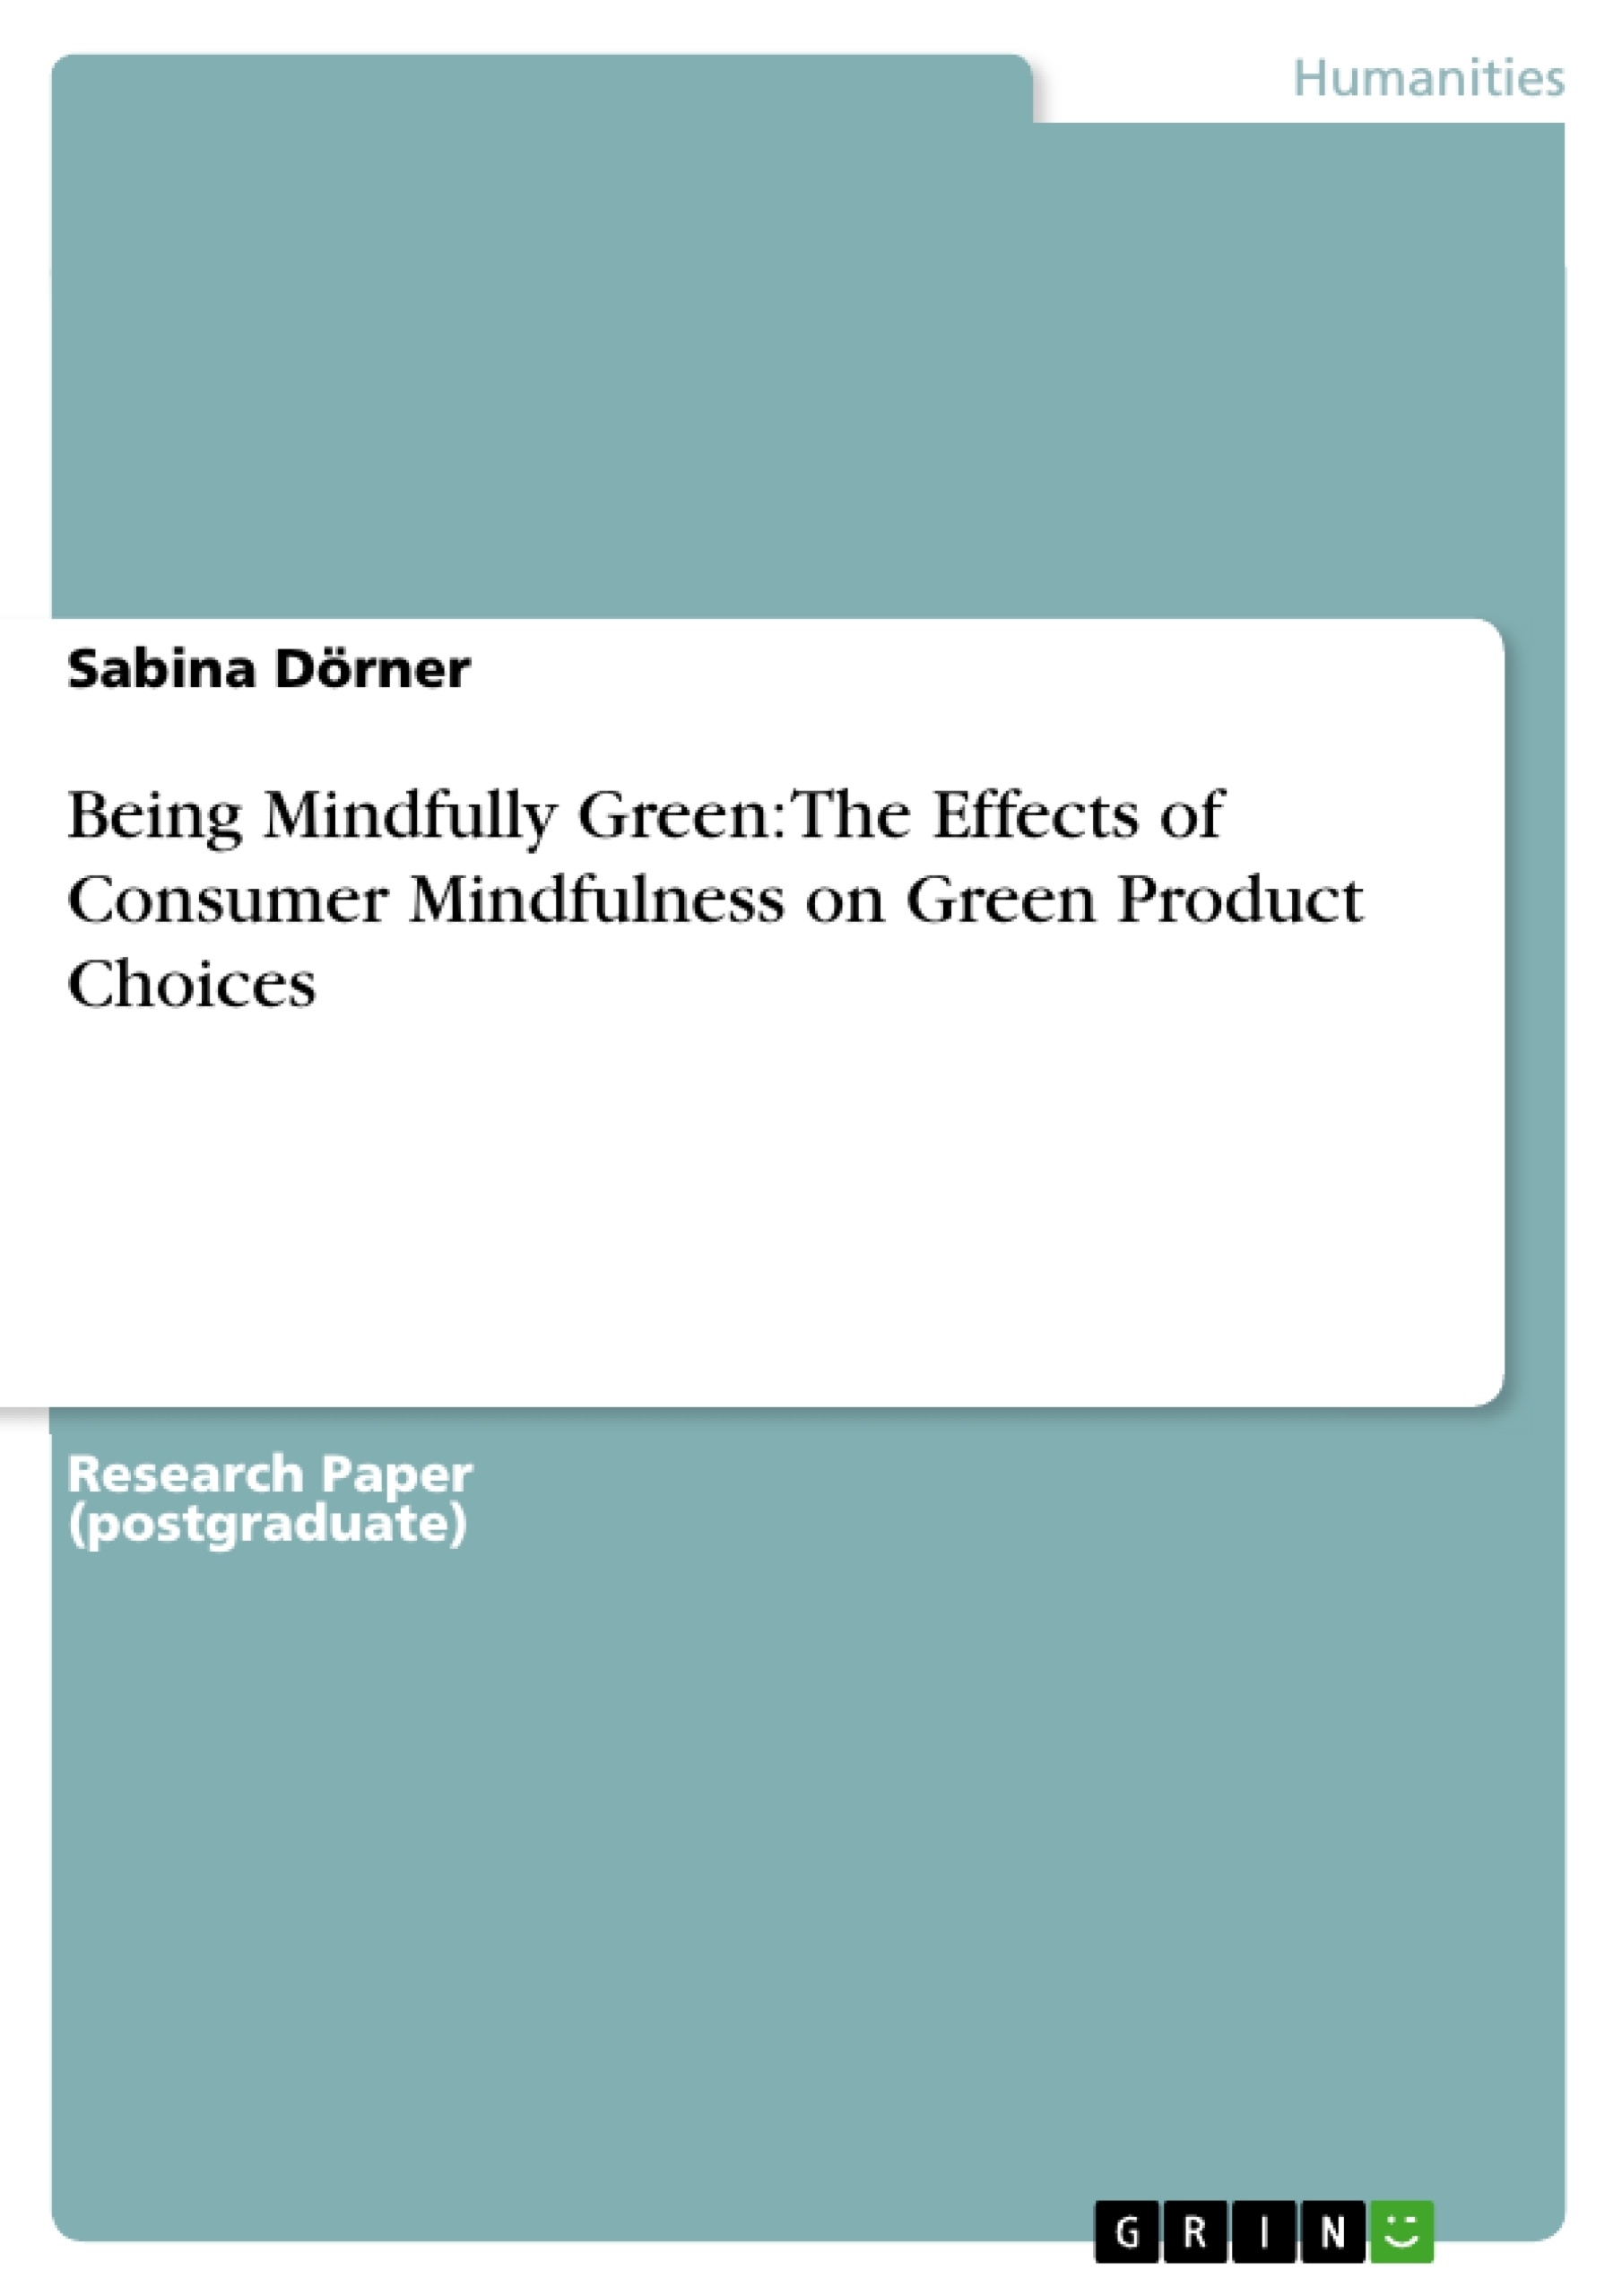 Título: Being Mindfully Green: The Effects of Consumer Mindfulness on Green Product Choices